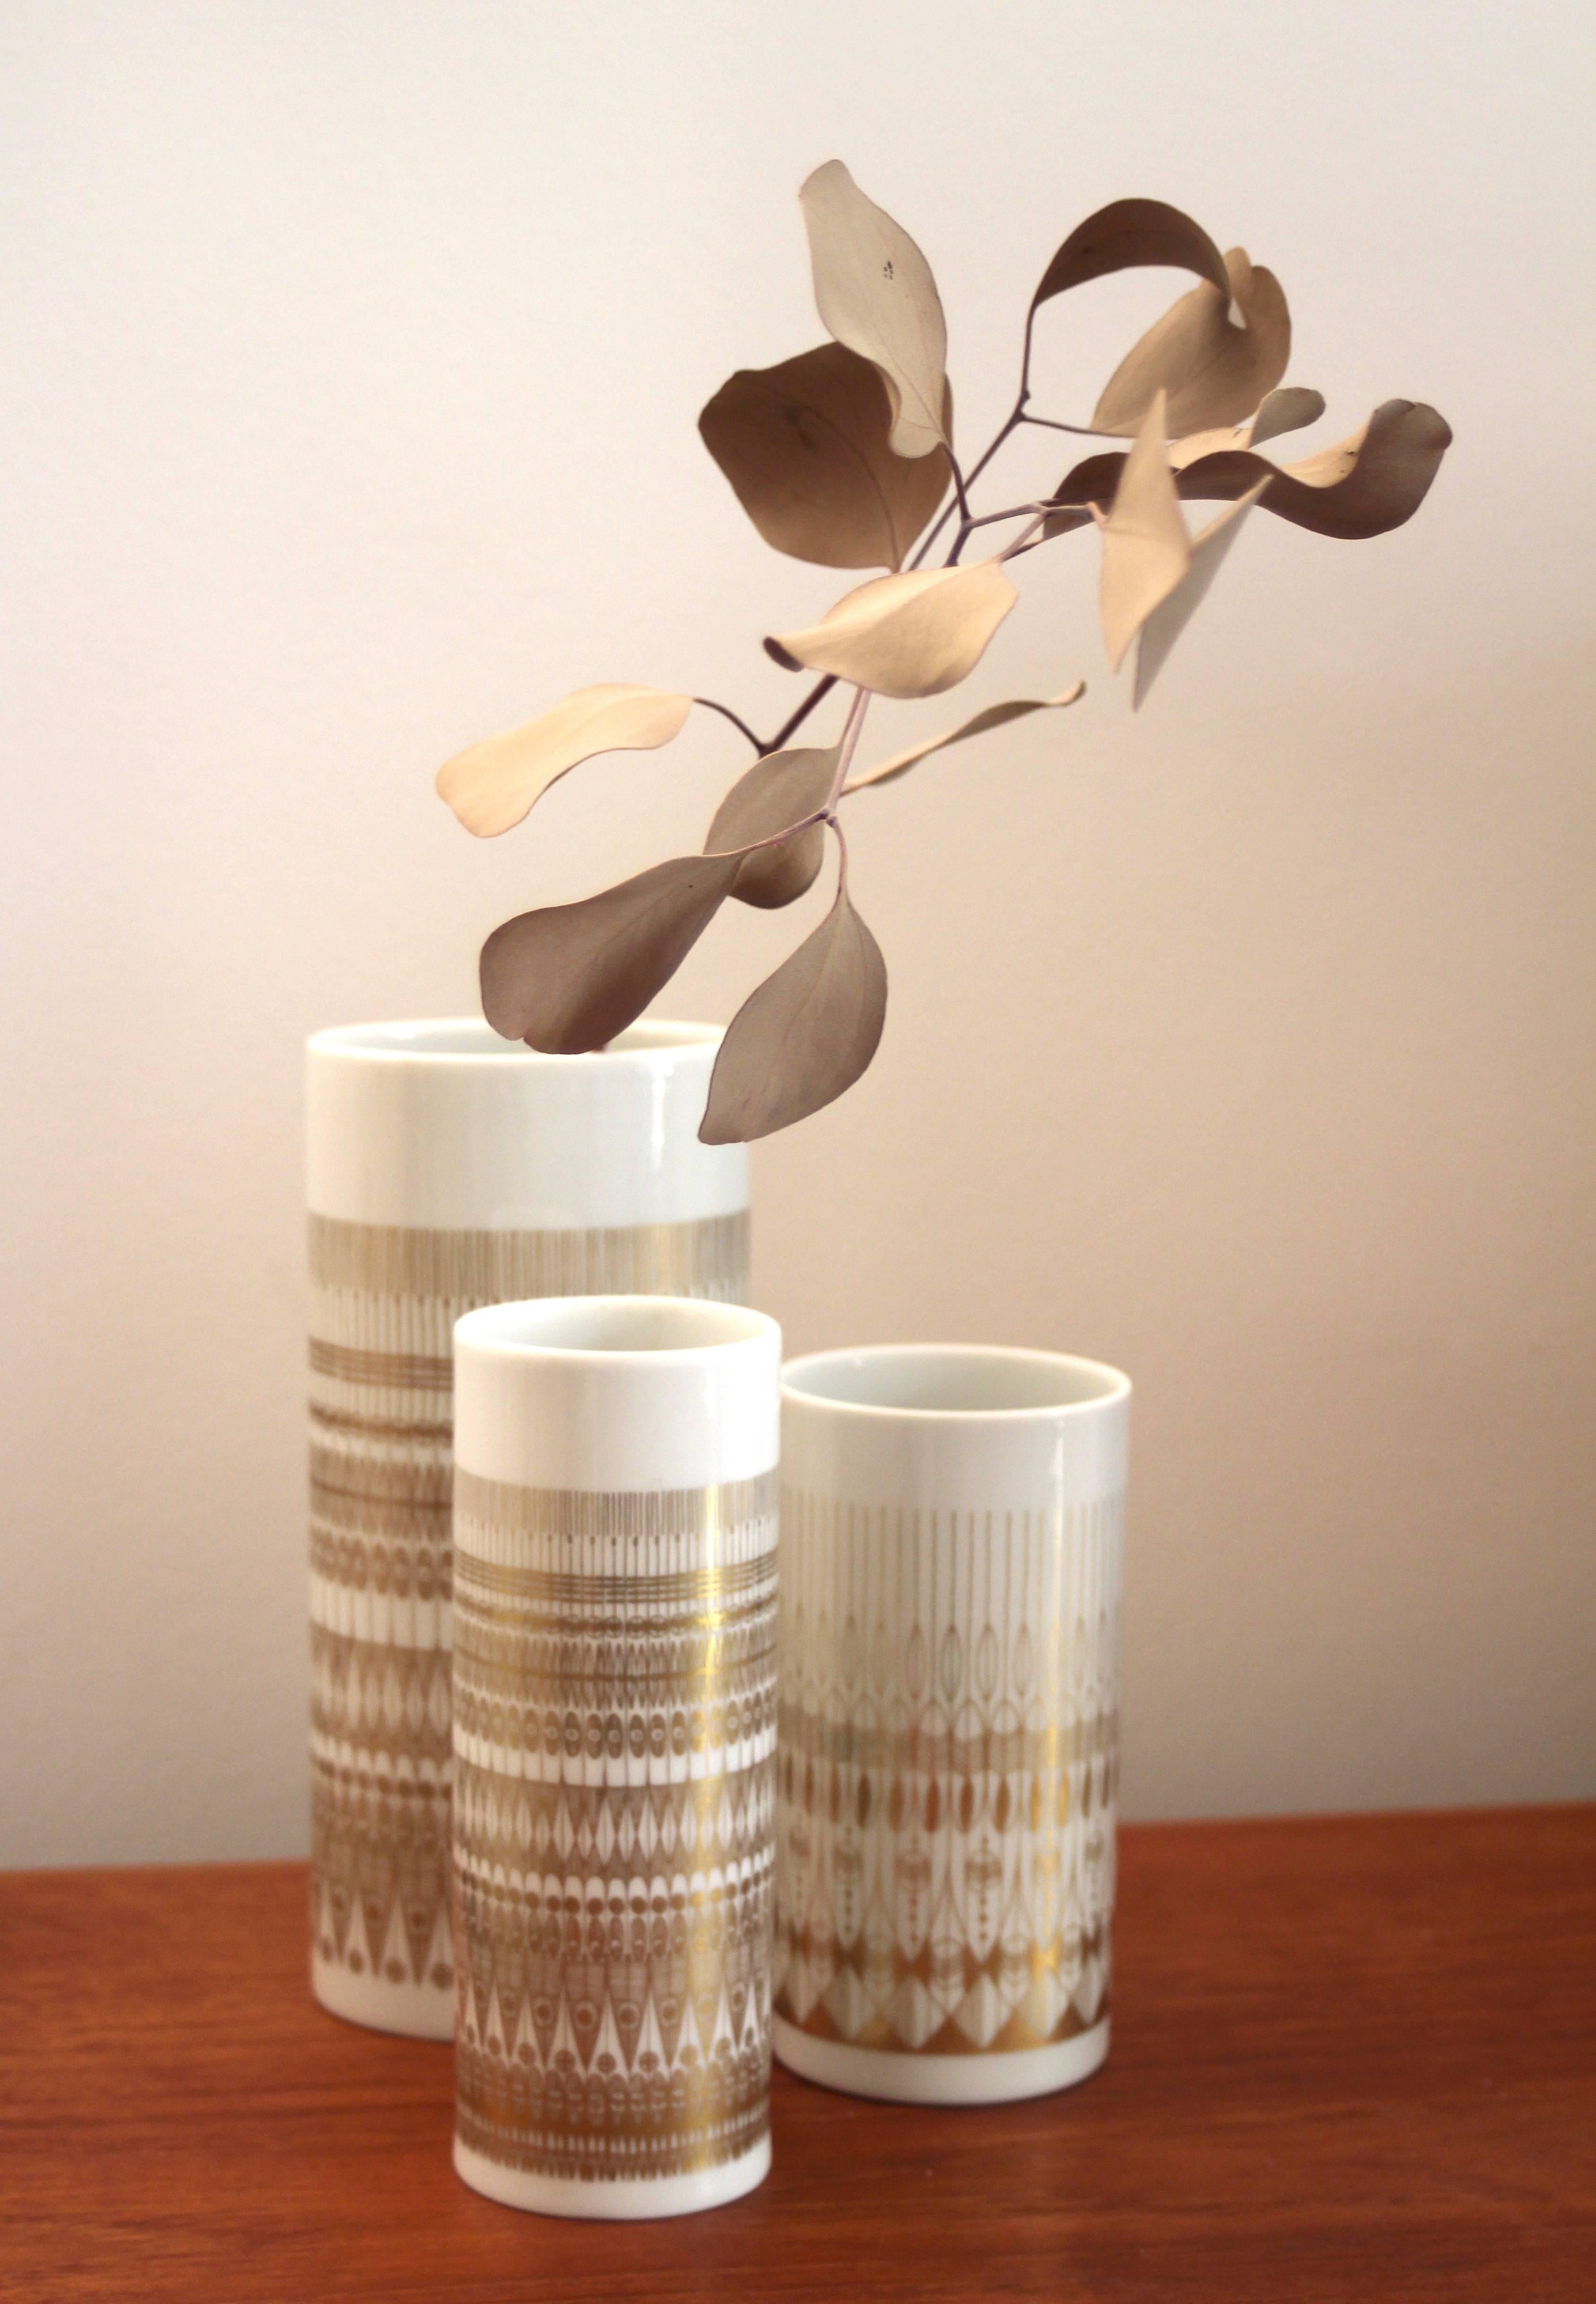 A stunning set of midcentury vases, designed by Hans Theo Baumann for the German porcelain manufacturer Rosenthal, produced around the 1960s-1970s in Germany. It features graphic op-type color print in gold on white lacquered porcelain.